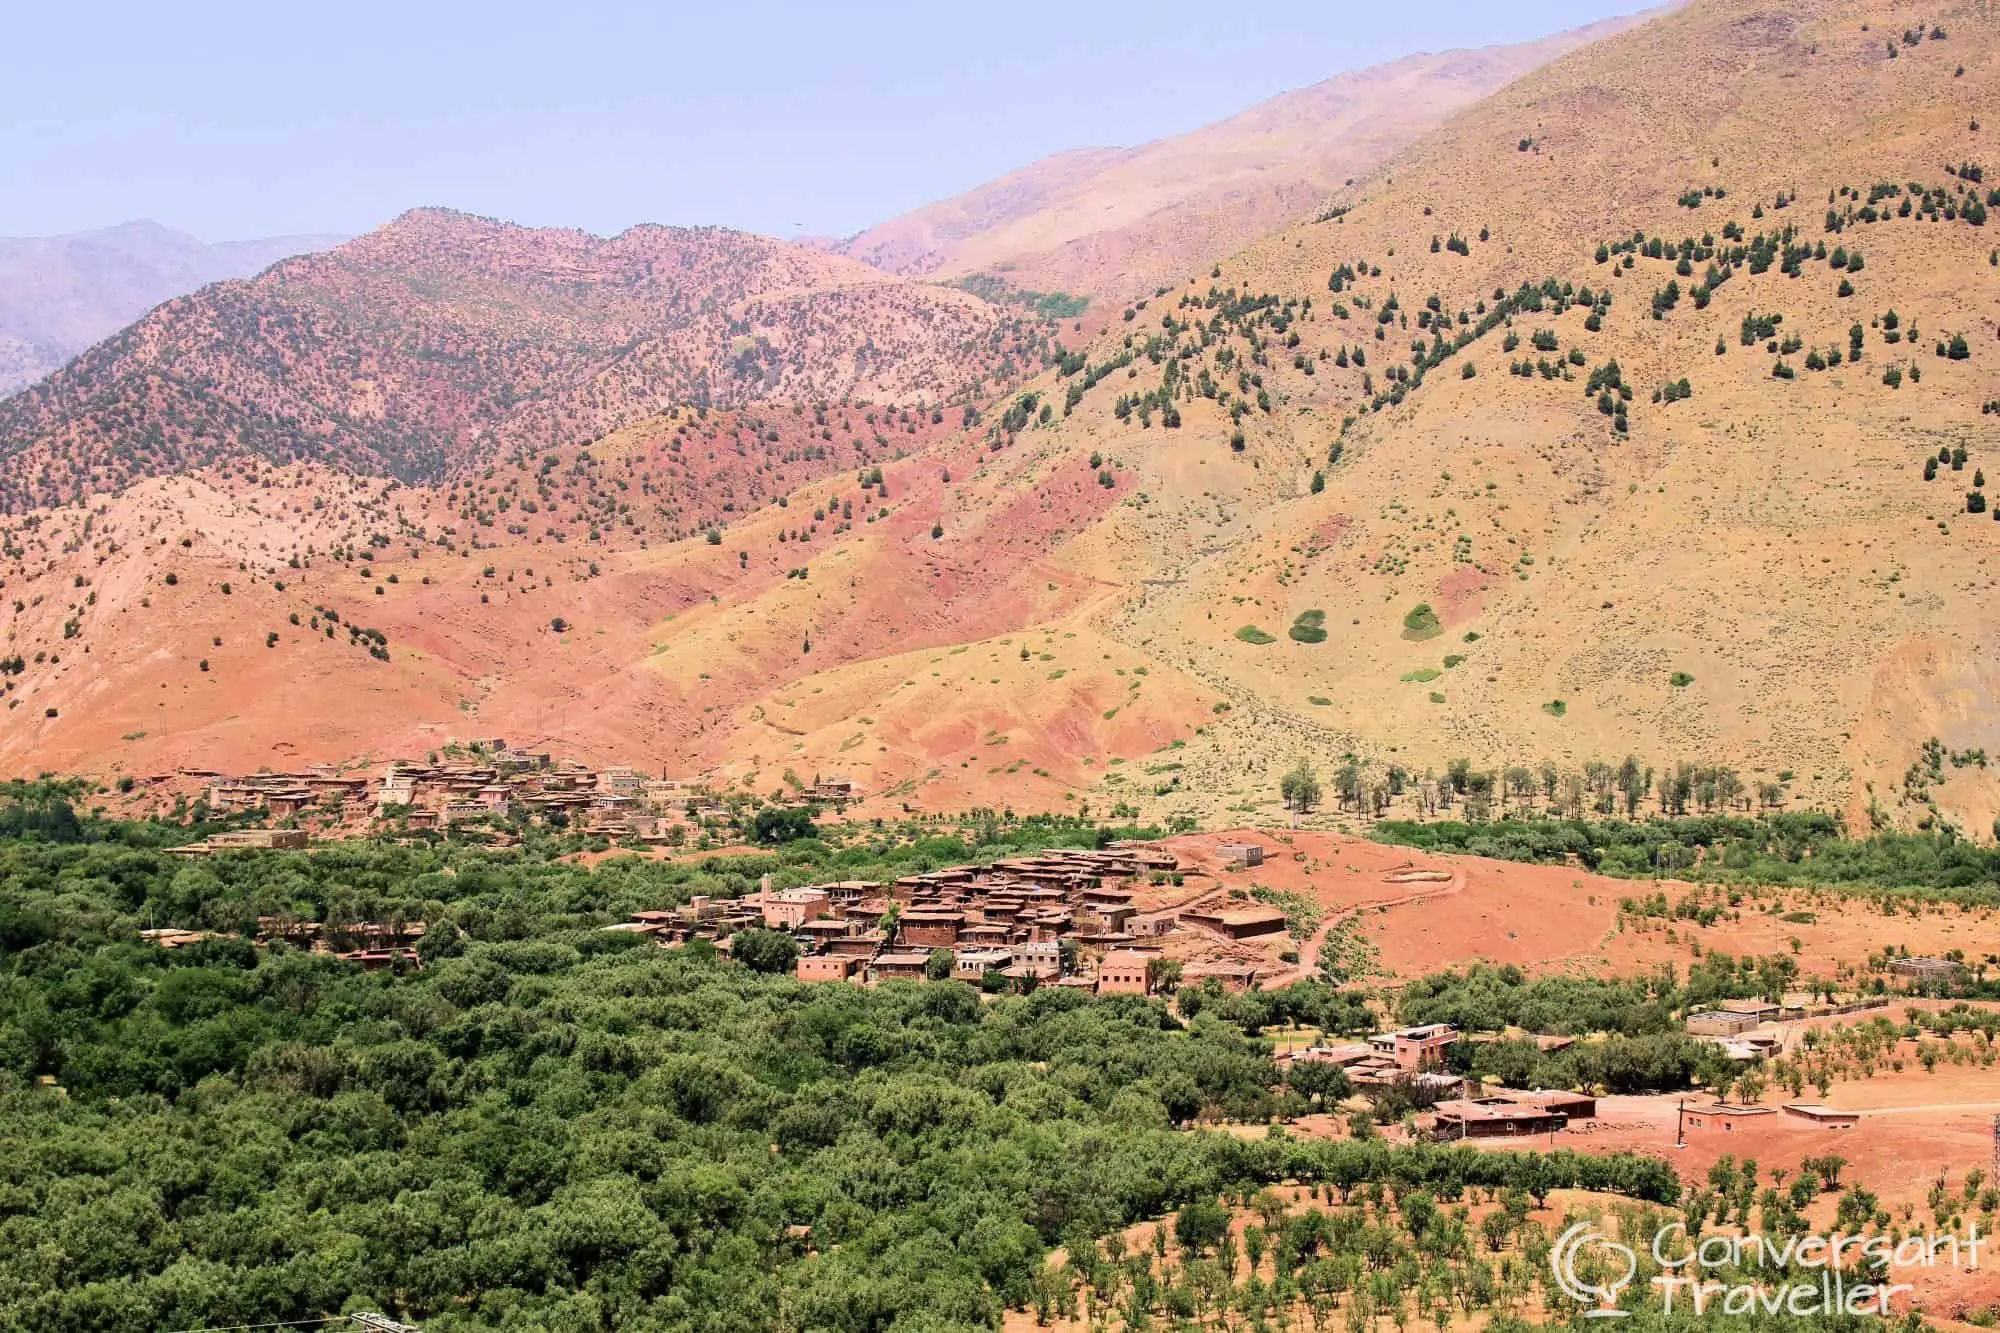 The beginning of the Tizi n Test is lined with hillside Berber villages in the High Atlas